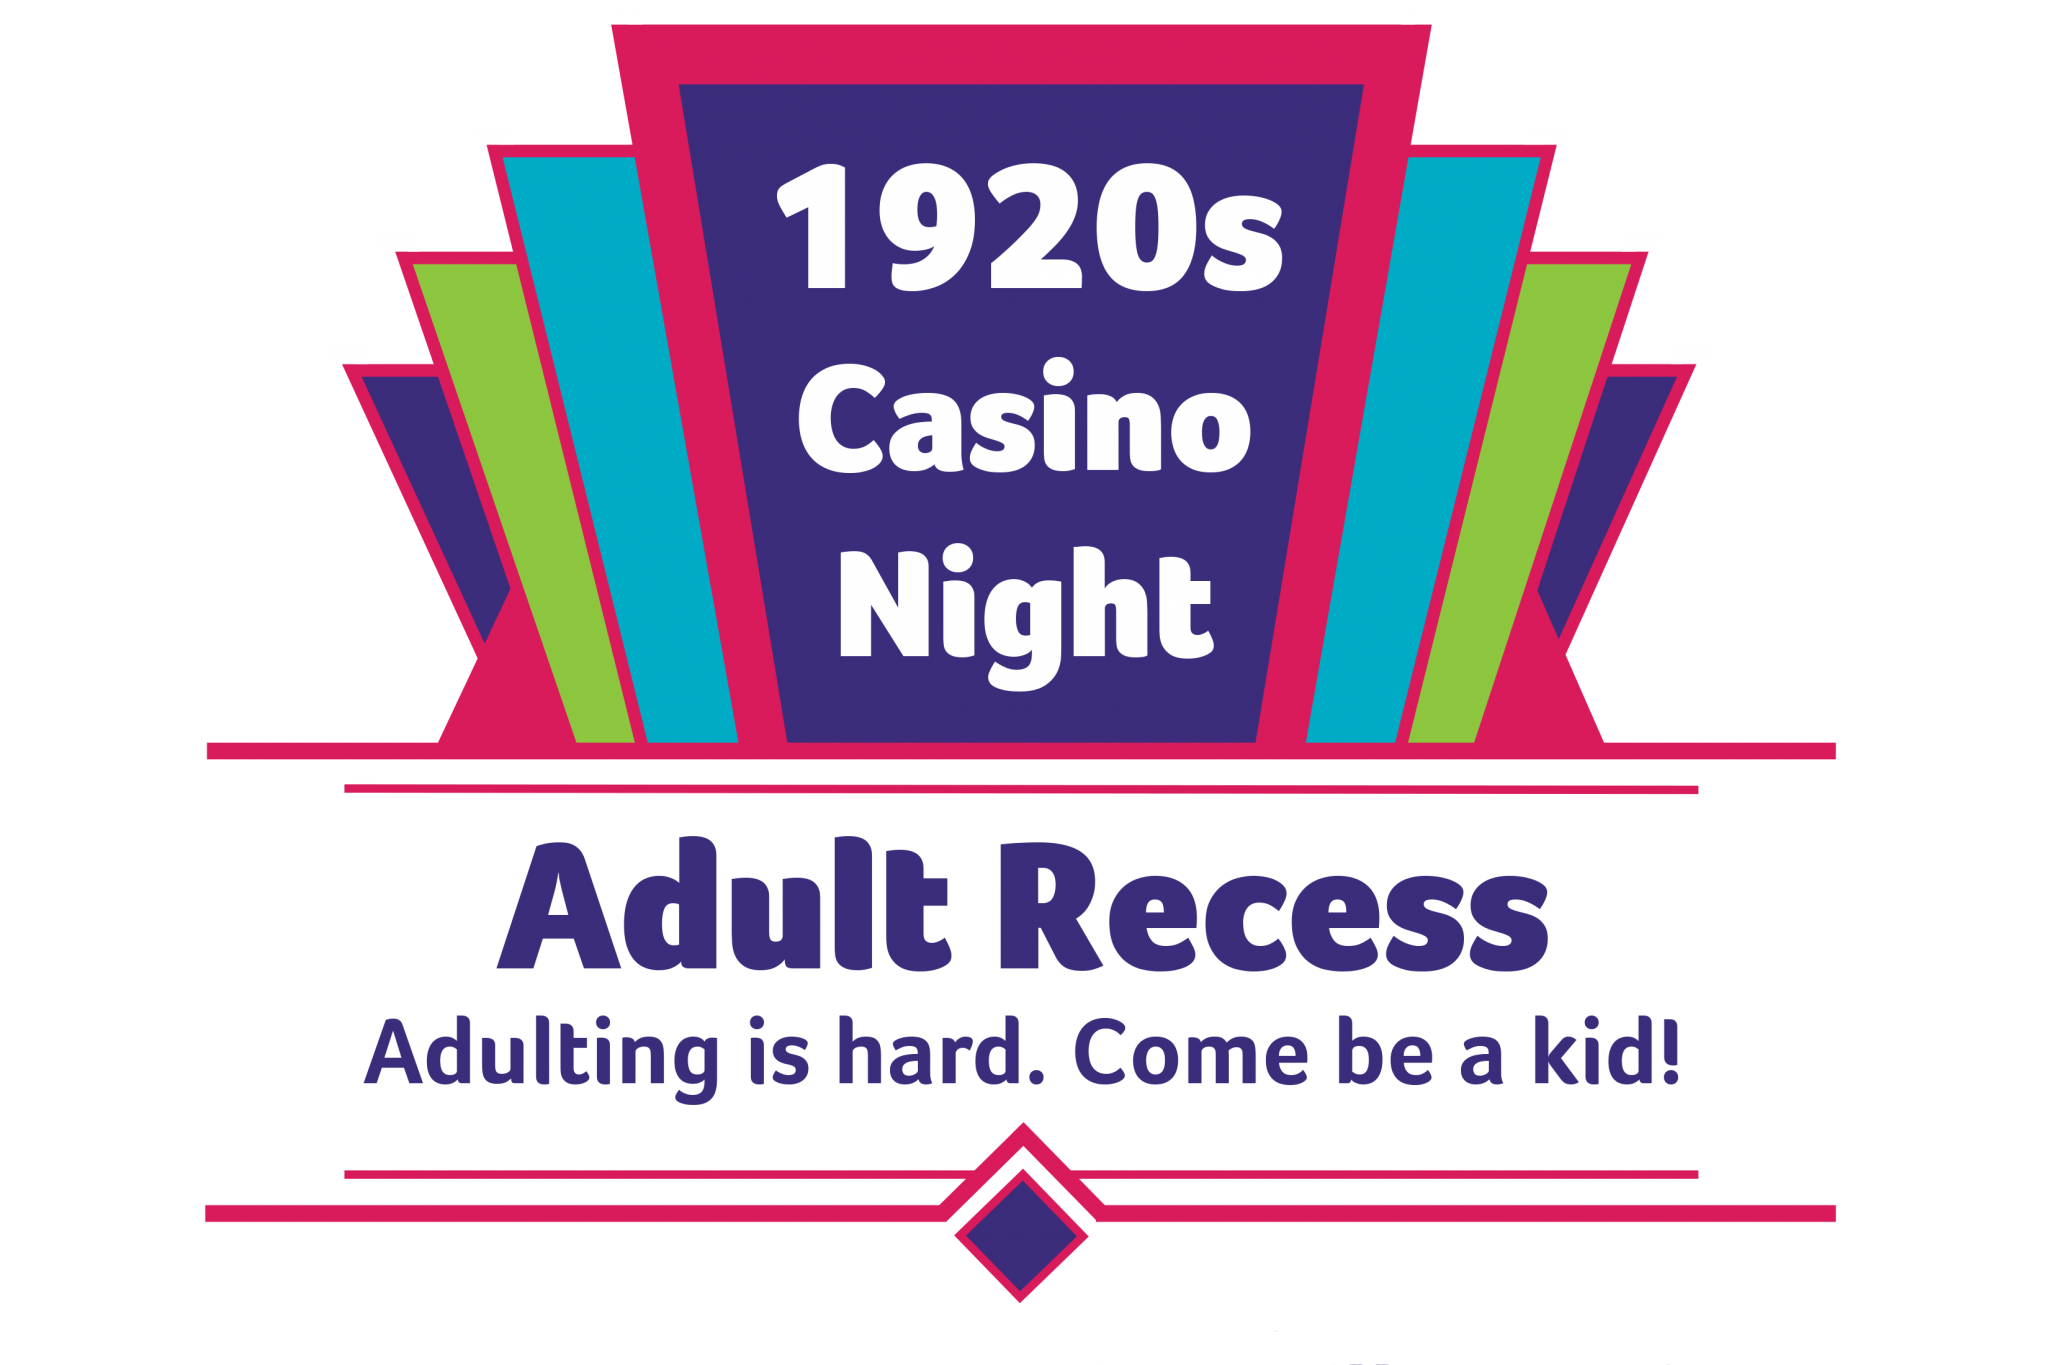 Check Out Our Newest Event Series: Adult Recess